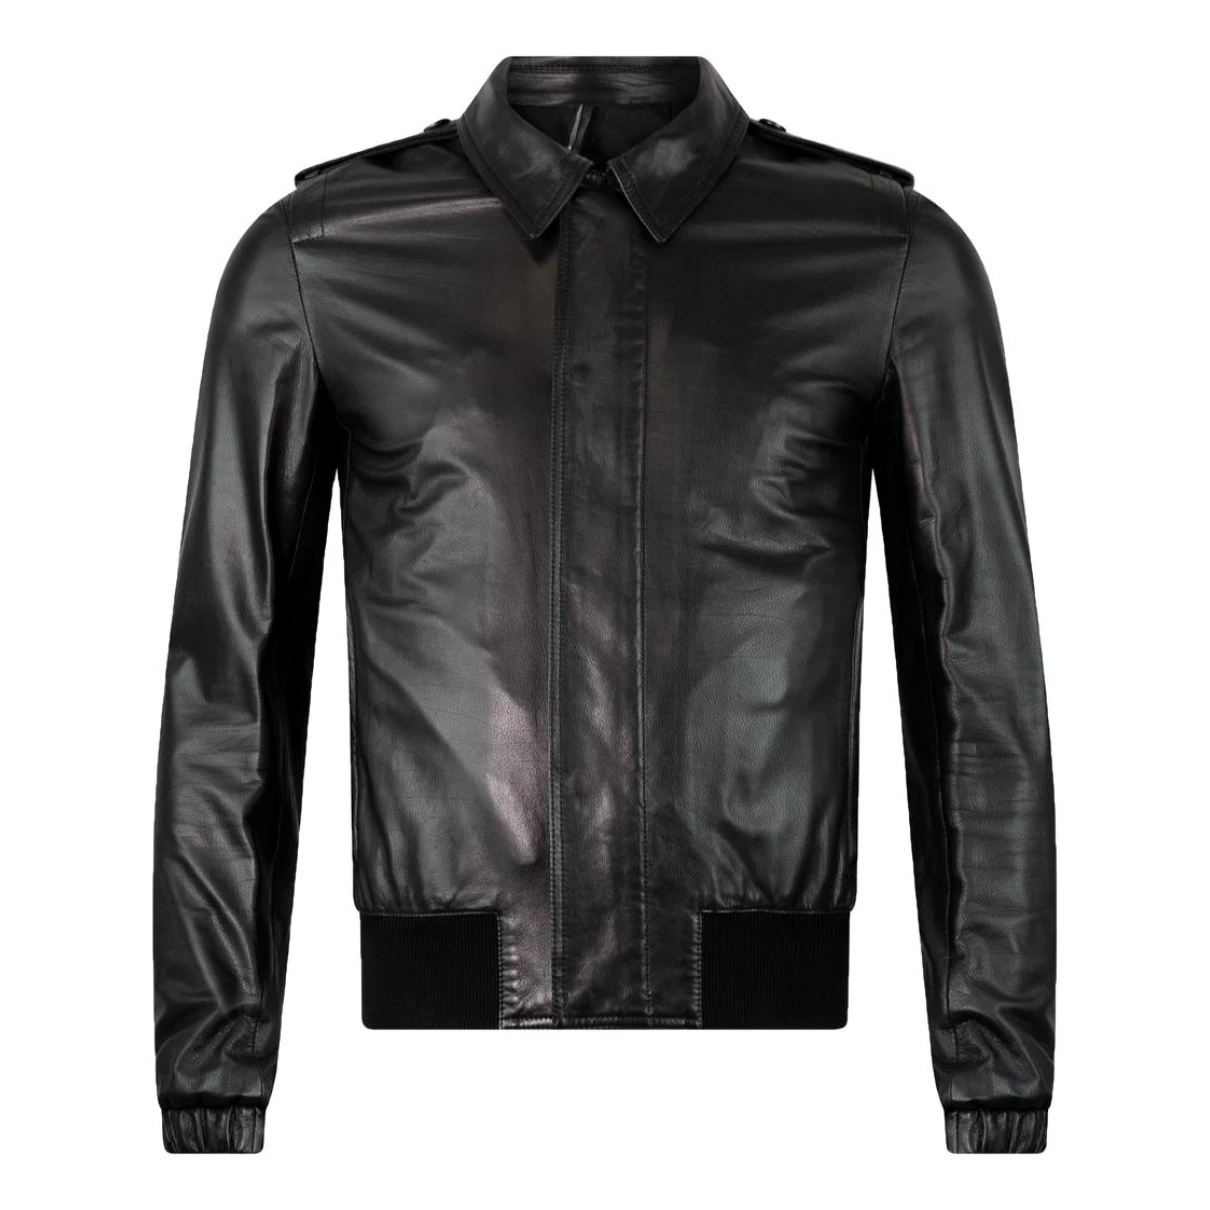 clothing Dior Homme jackets for Male Leather 44 FR. Used condition